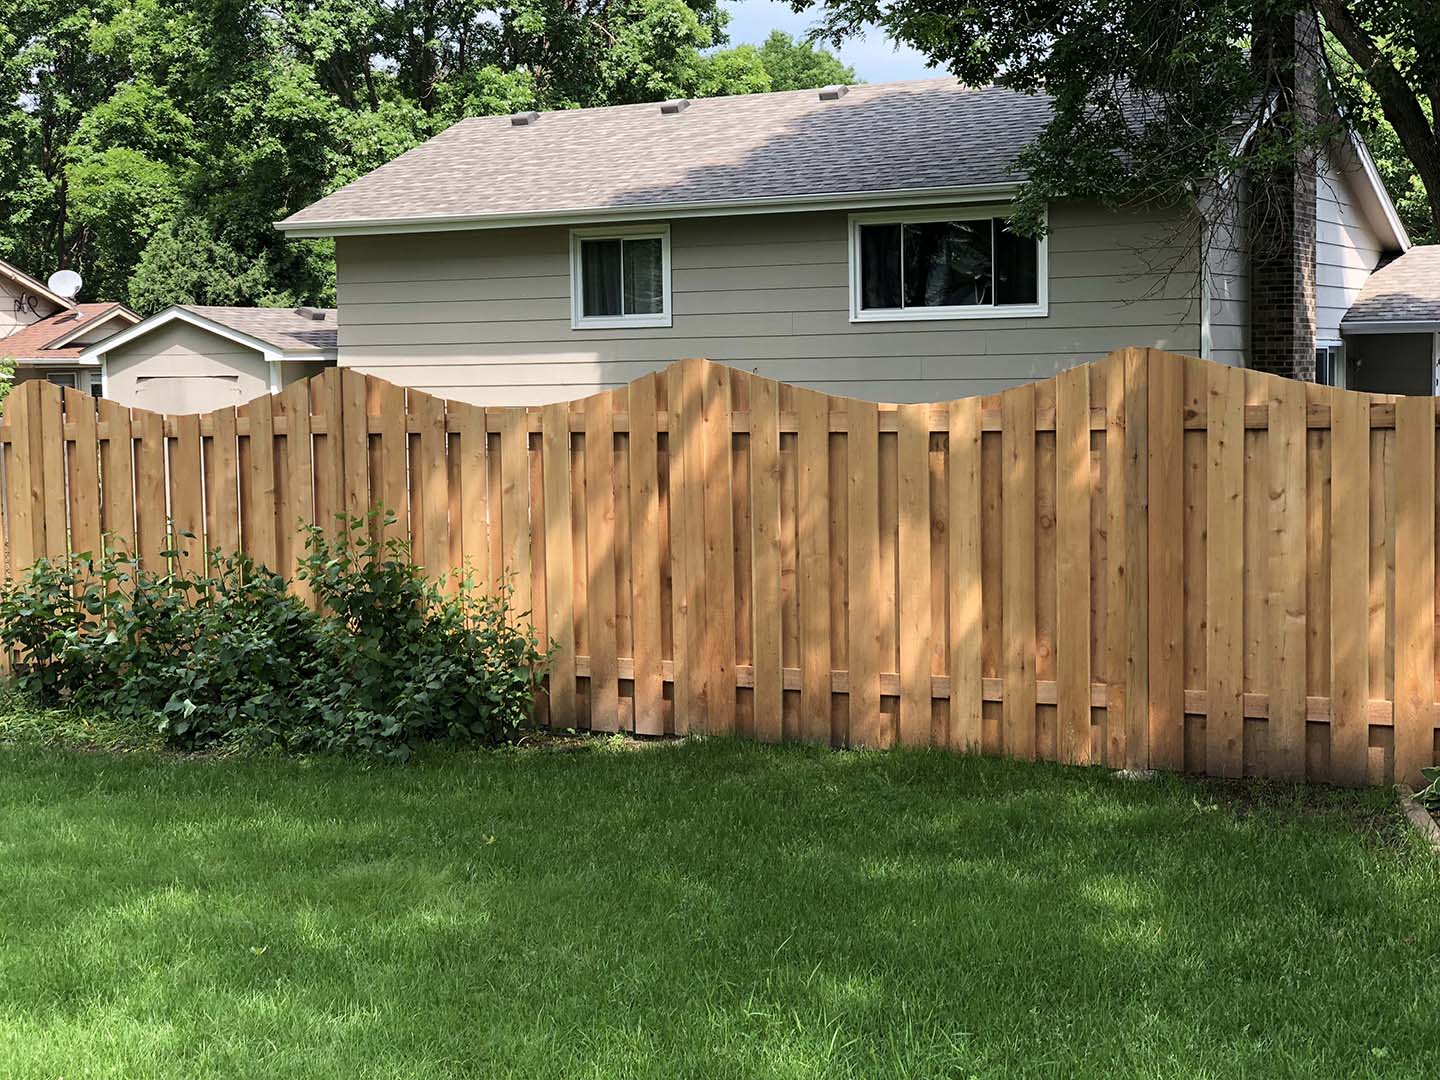 Stacy Minnesota residential fencing contractor